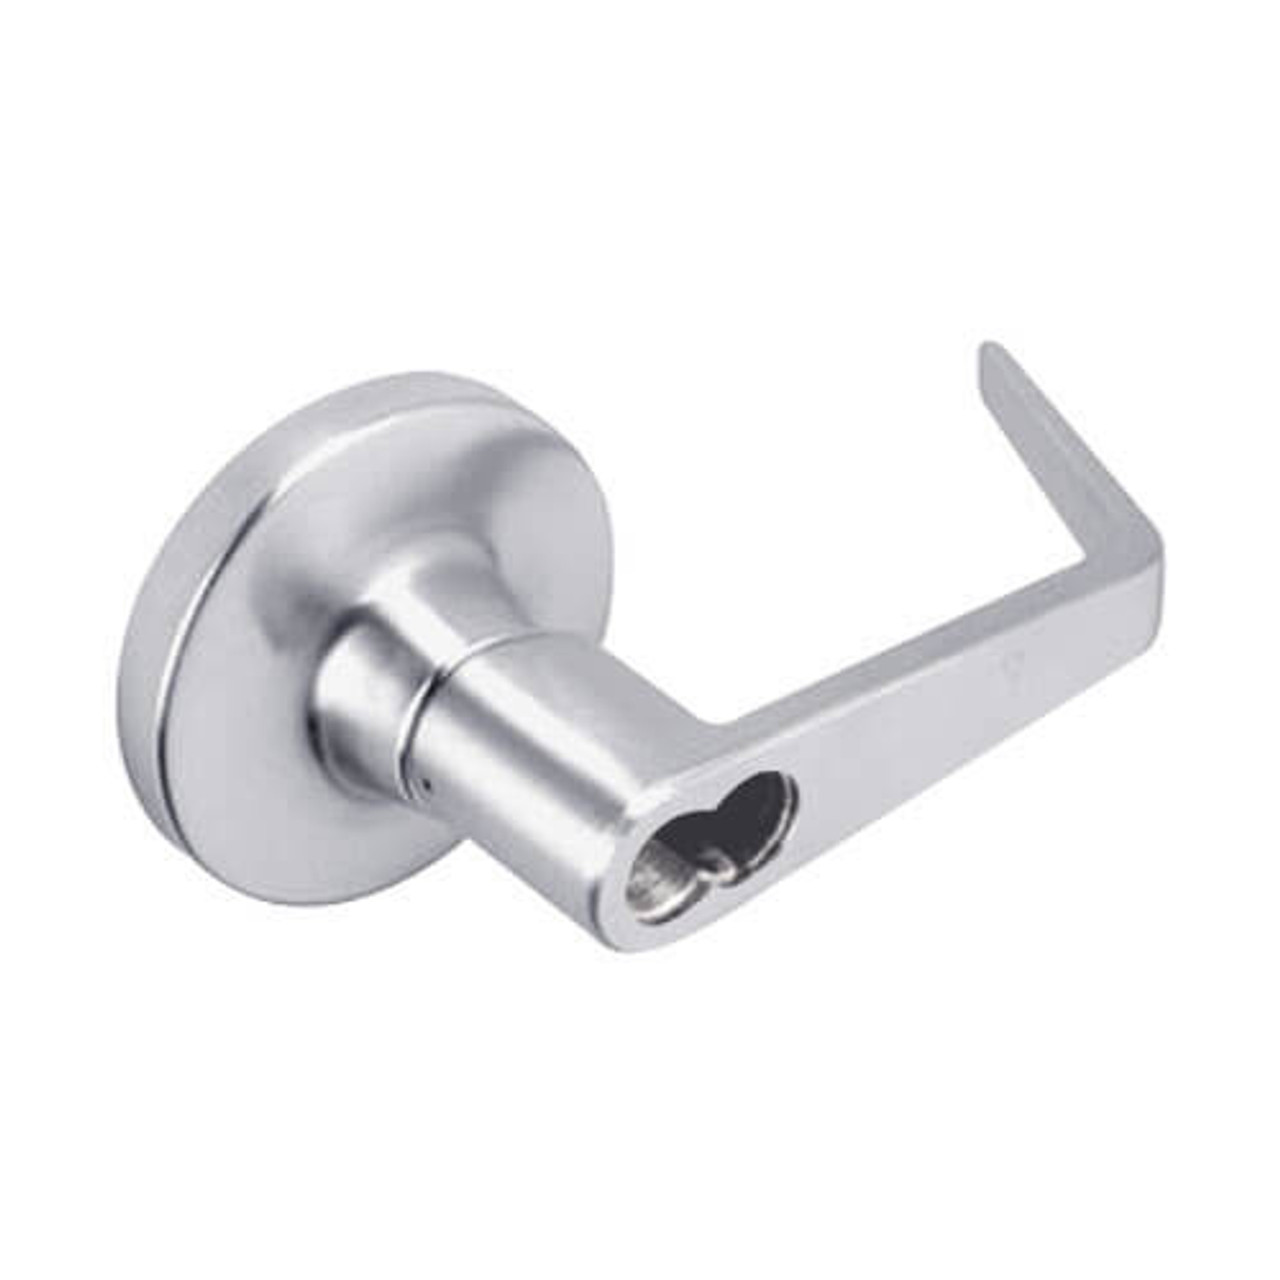 MA441BD-DG-626 Falcon Mortise Locks MA Series Classroom Security with DG Lever in Satin Chrome Finish